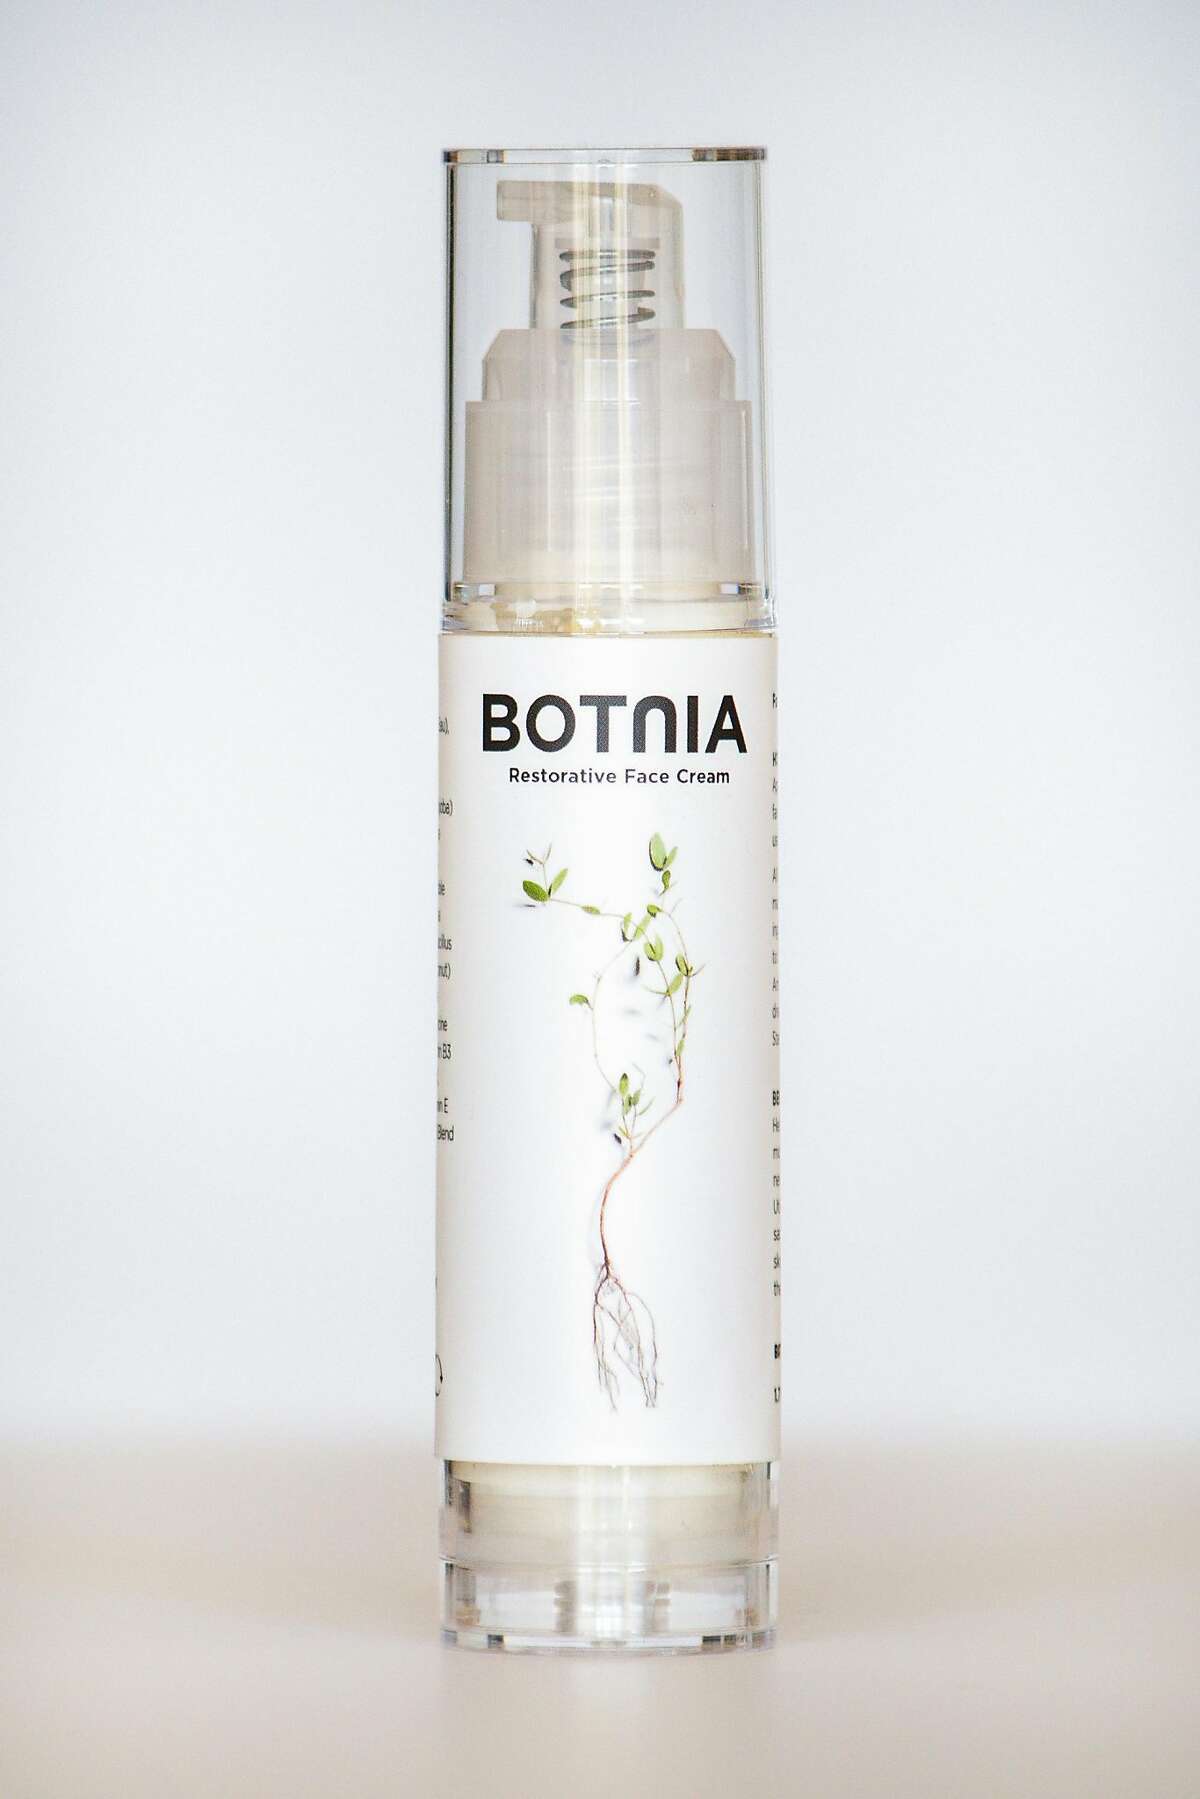 Handmade in San Francisco by Skin Remedy Spa founder Justine Kahn, Botnia Restorative Face Cream is simplicity at its best. With only a dozen ingredients � all-natural line-fighters and moisturizers like squalane, hyaluronic acid and plant peptides � this fluffy cloud-like cream will coddle your skin through the rainy season. $62, http://www.botniaskincare.com.